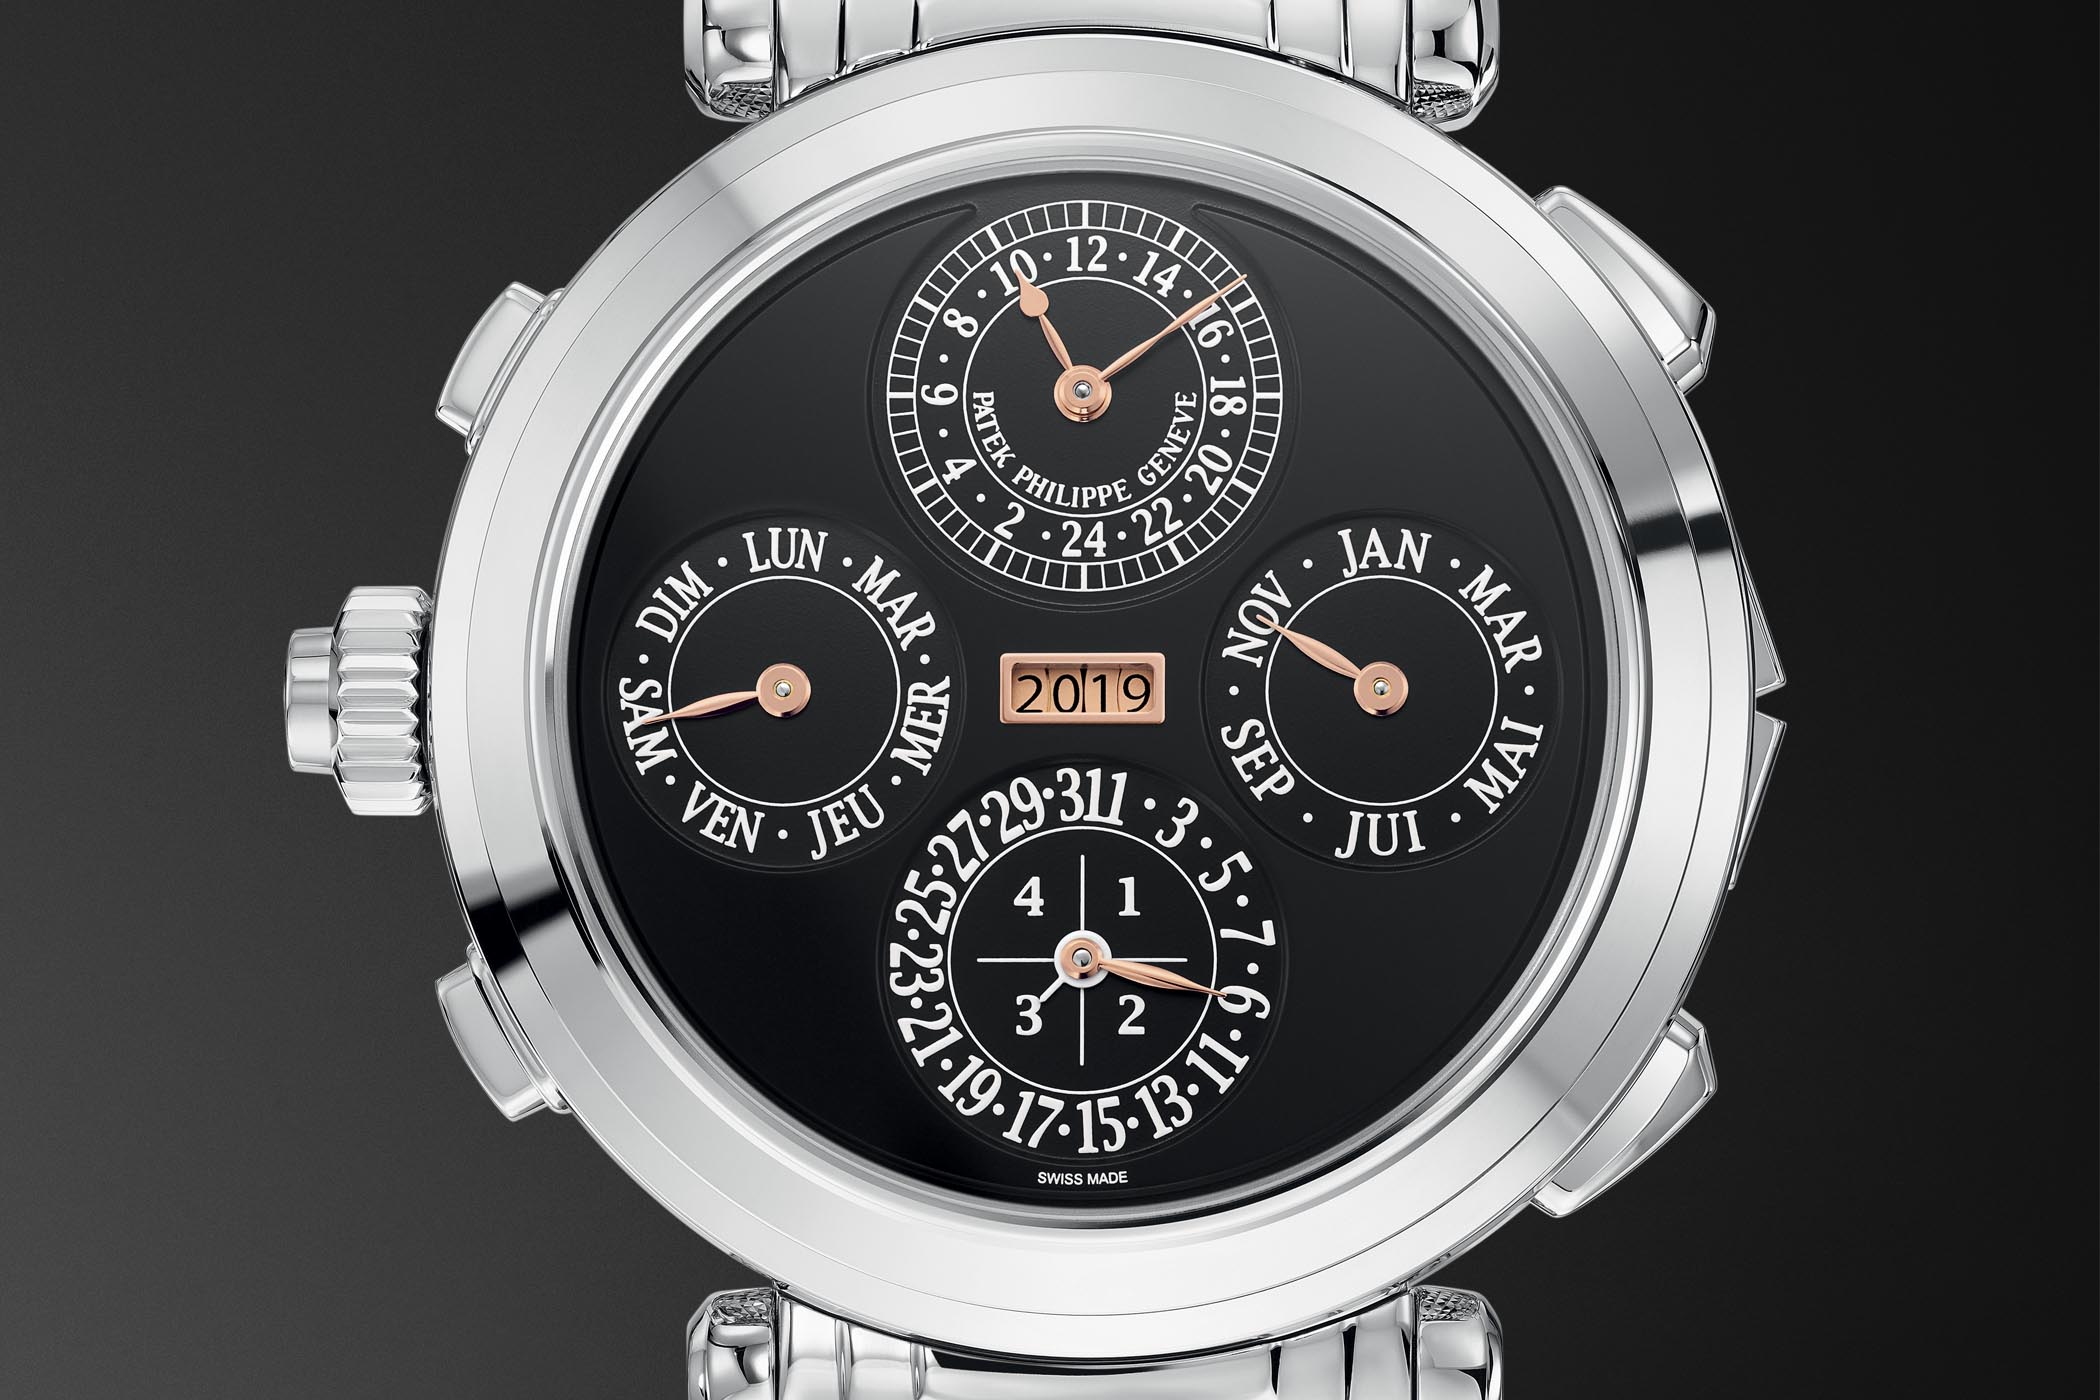 Only Watch 2019 - Patek Philippe 6300A Steel grandmaster chime